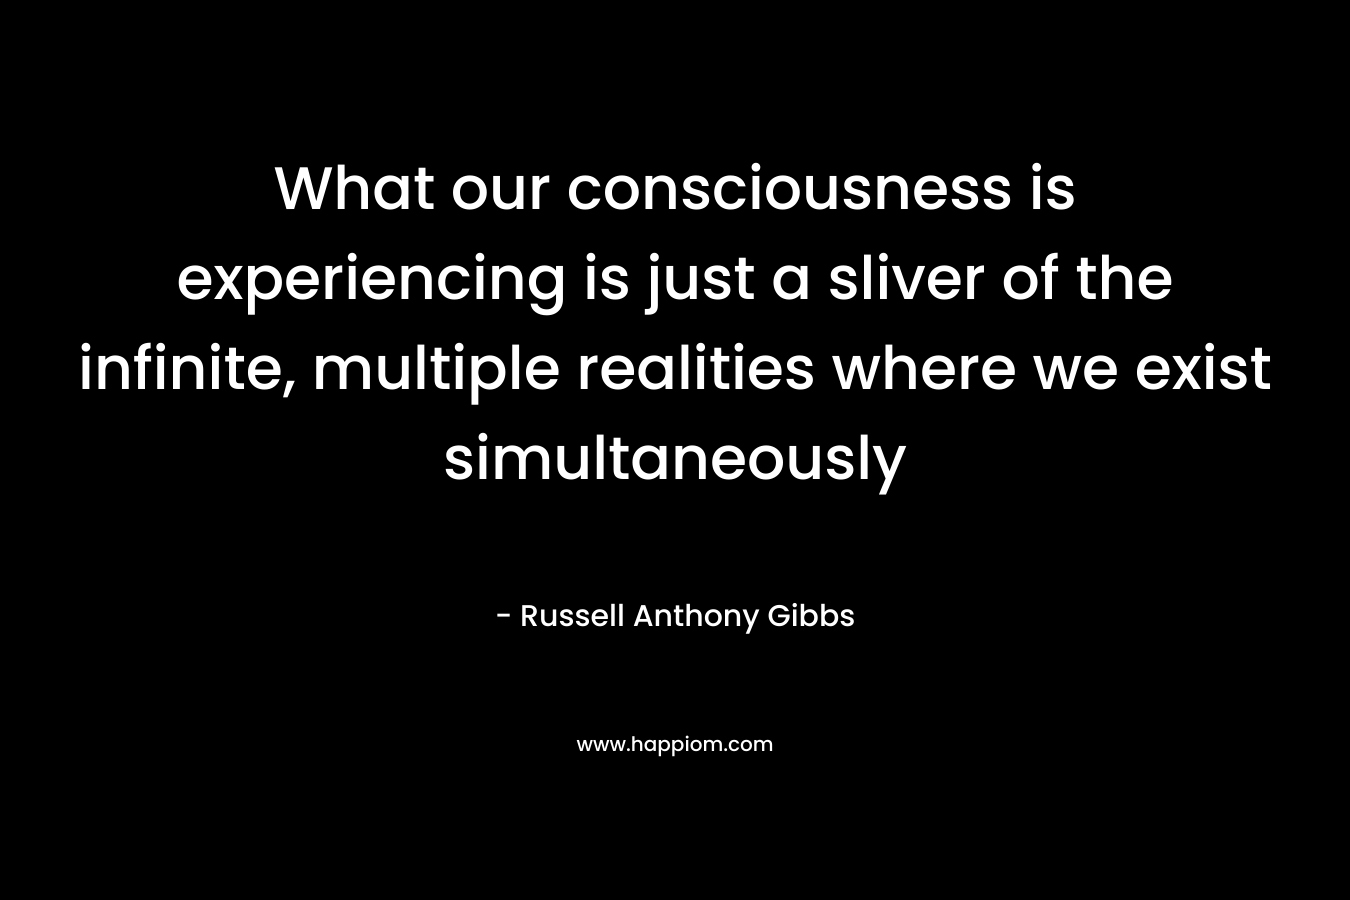 What our consciousness is experiencing is just a sliver of the infinite, multiple realities where we exist simultaneously